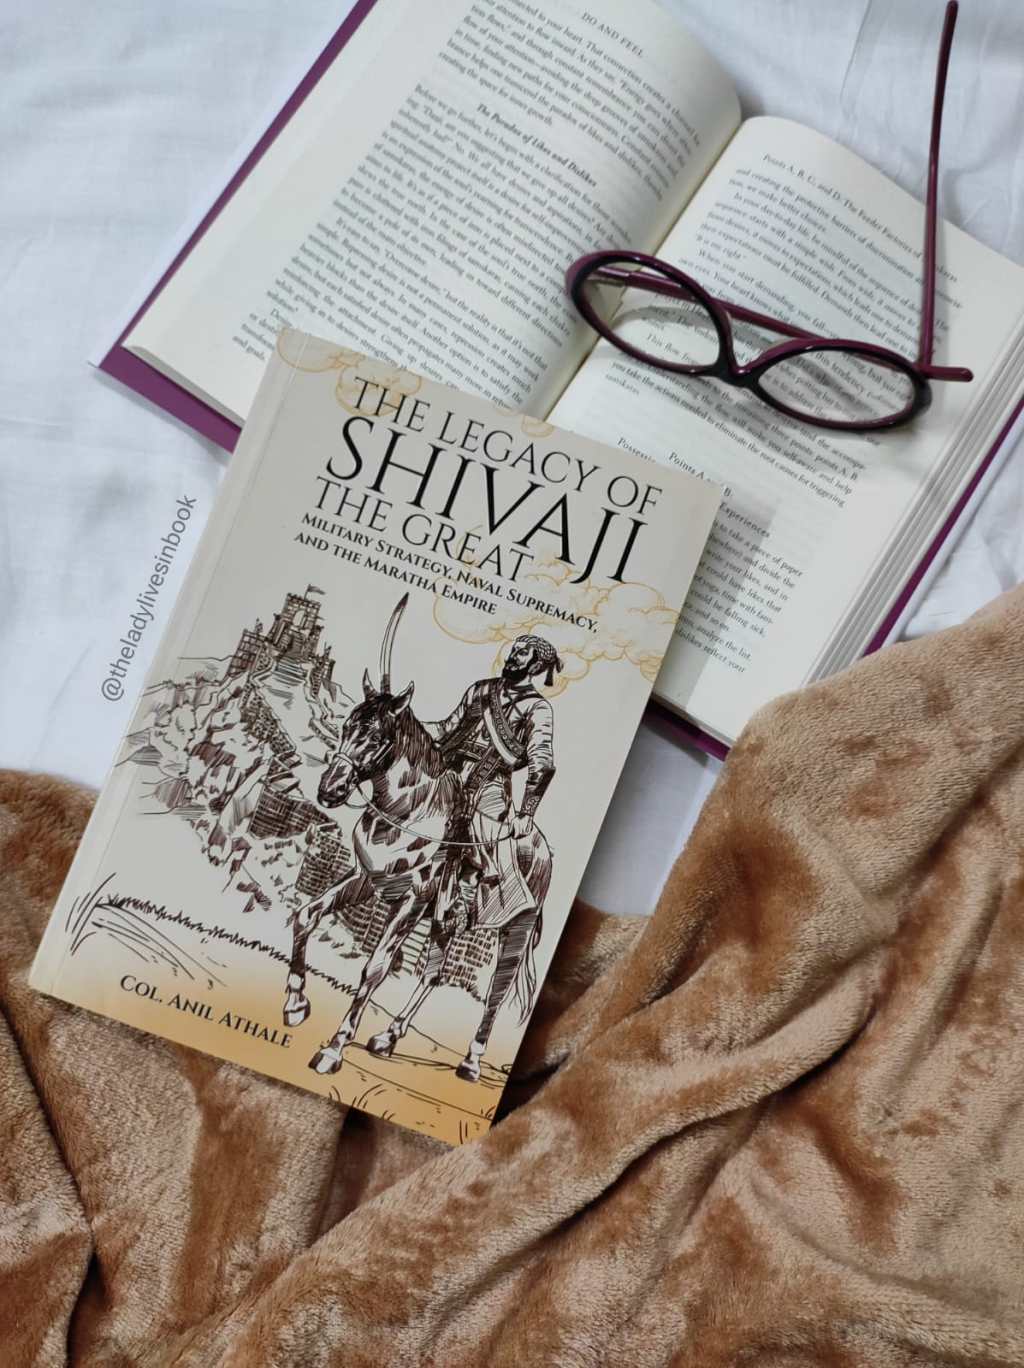 A painstaking brilliant research work on Great Maratha Leader: The Legacy Of Shivaji The Great By Col. Anil Athale – Book Review